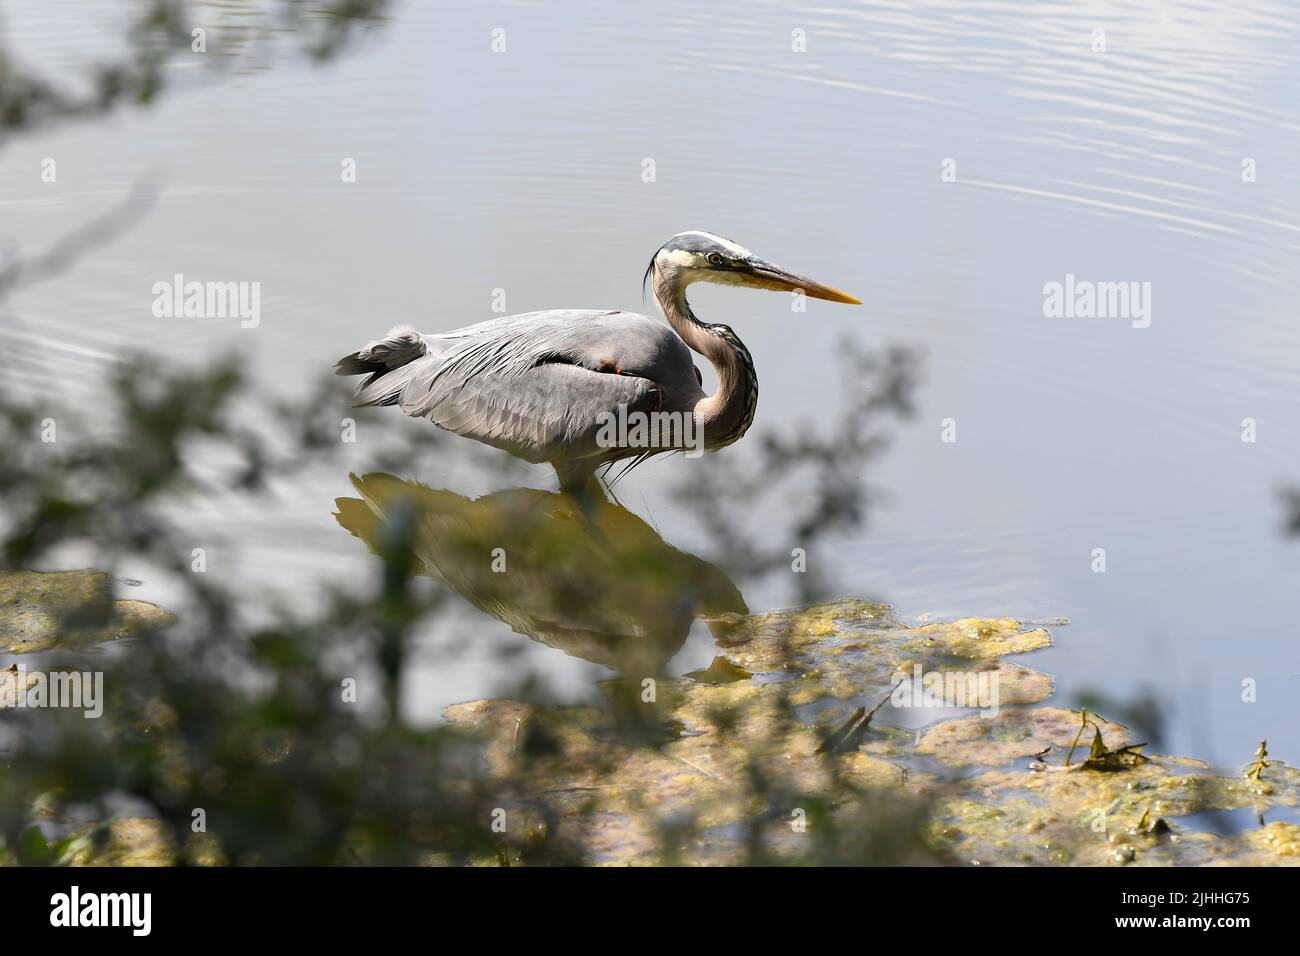 Profile of Great Blue Heron on pond edge green foliage foreground Stock Photo